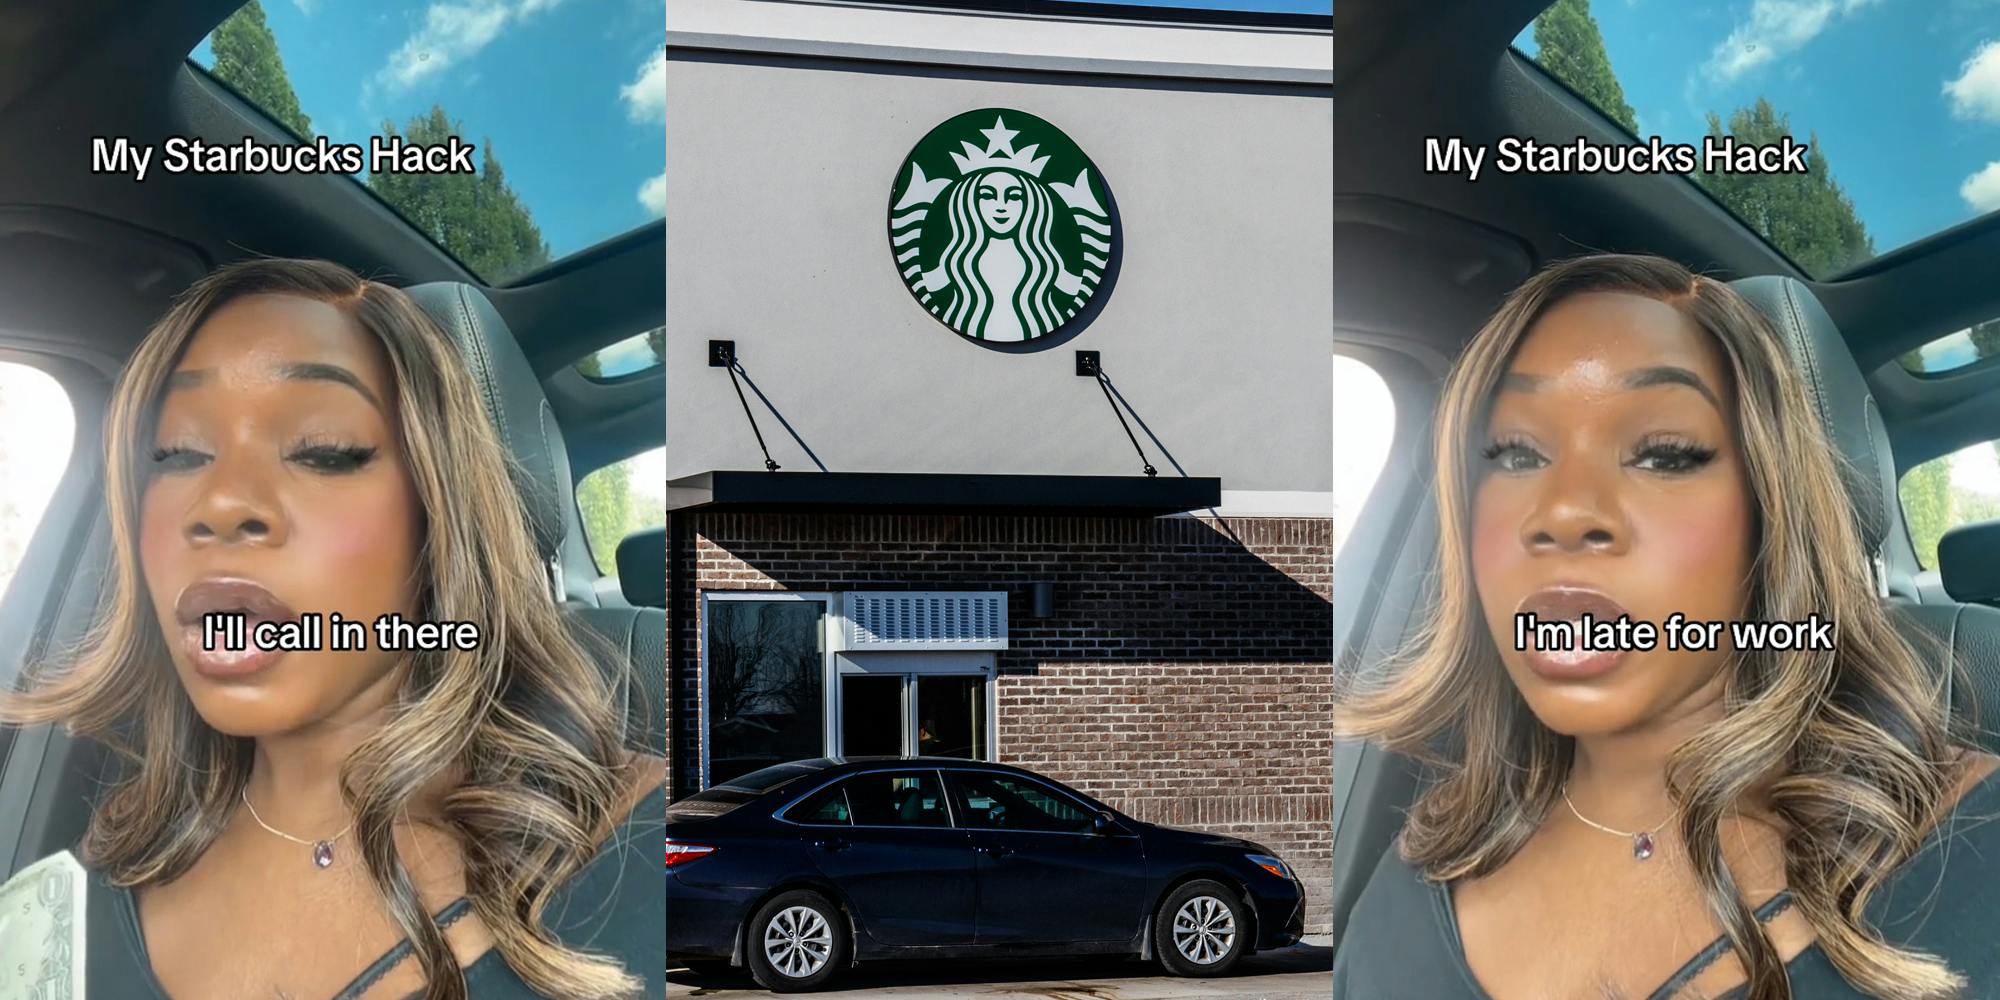 Starbucks customer speaking in car with caption "My Starbucks Hack I'll call in there" (l) Starbucks drive thru with sign (c) Starbucks customer speaking in car with caption "My Starbucks Hack I'm late for work" (r)